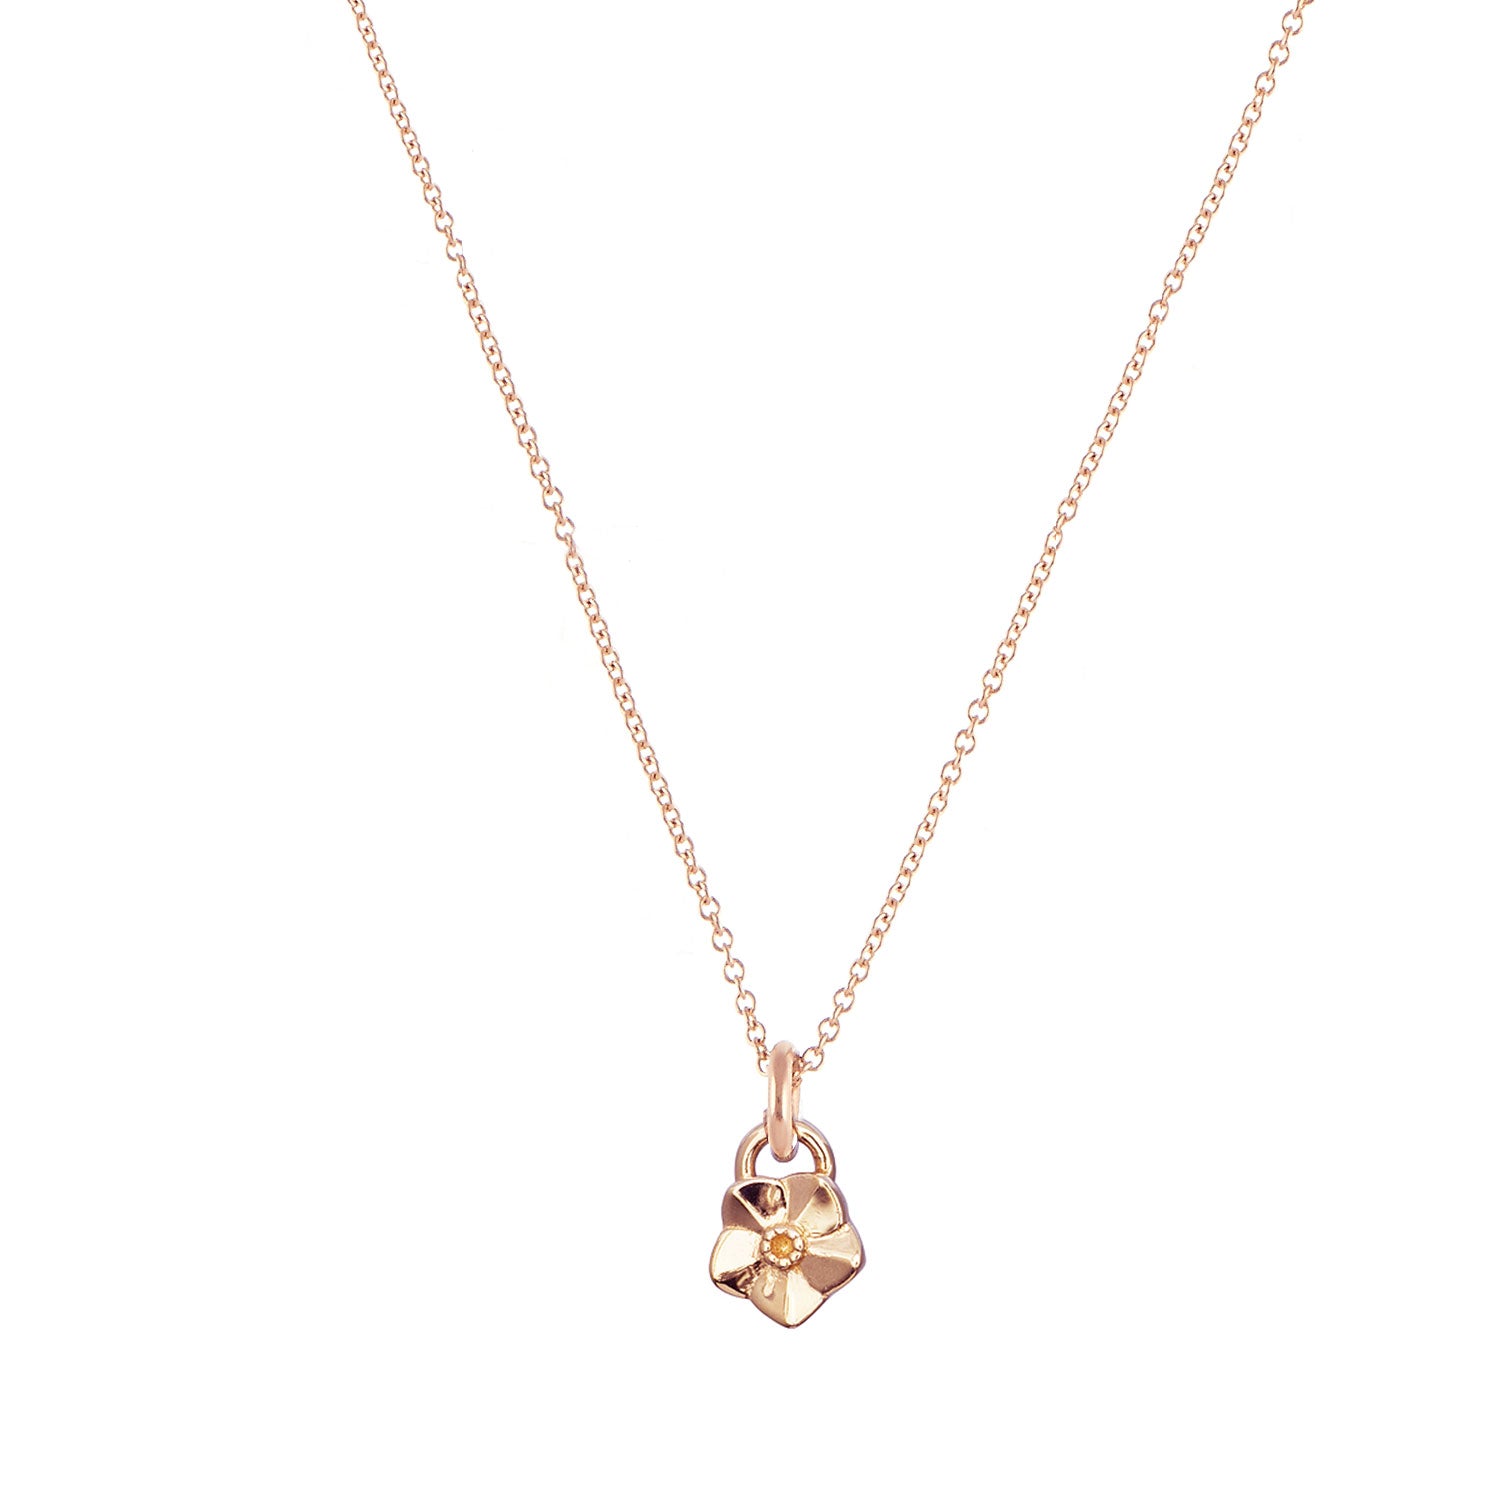 Solid rose gold tiny forget me not flower necklace Scarlett Jewellery